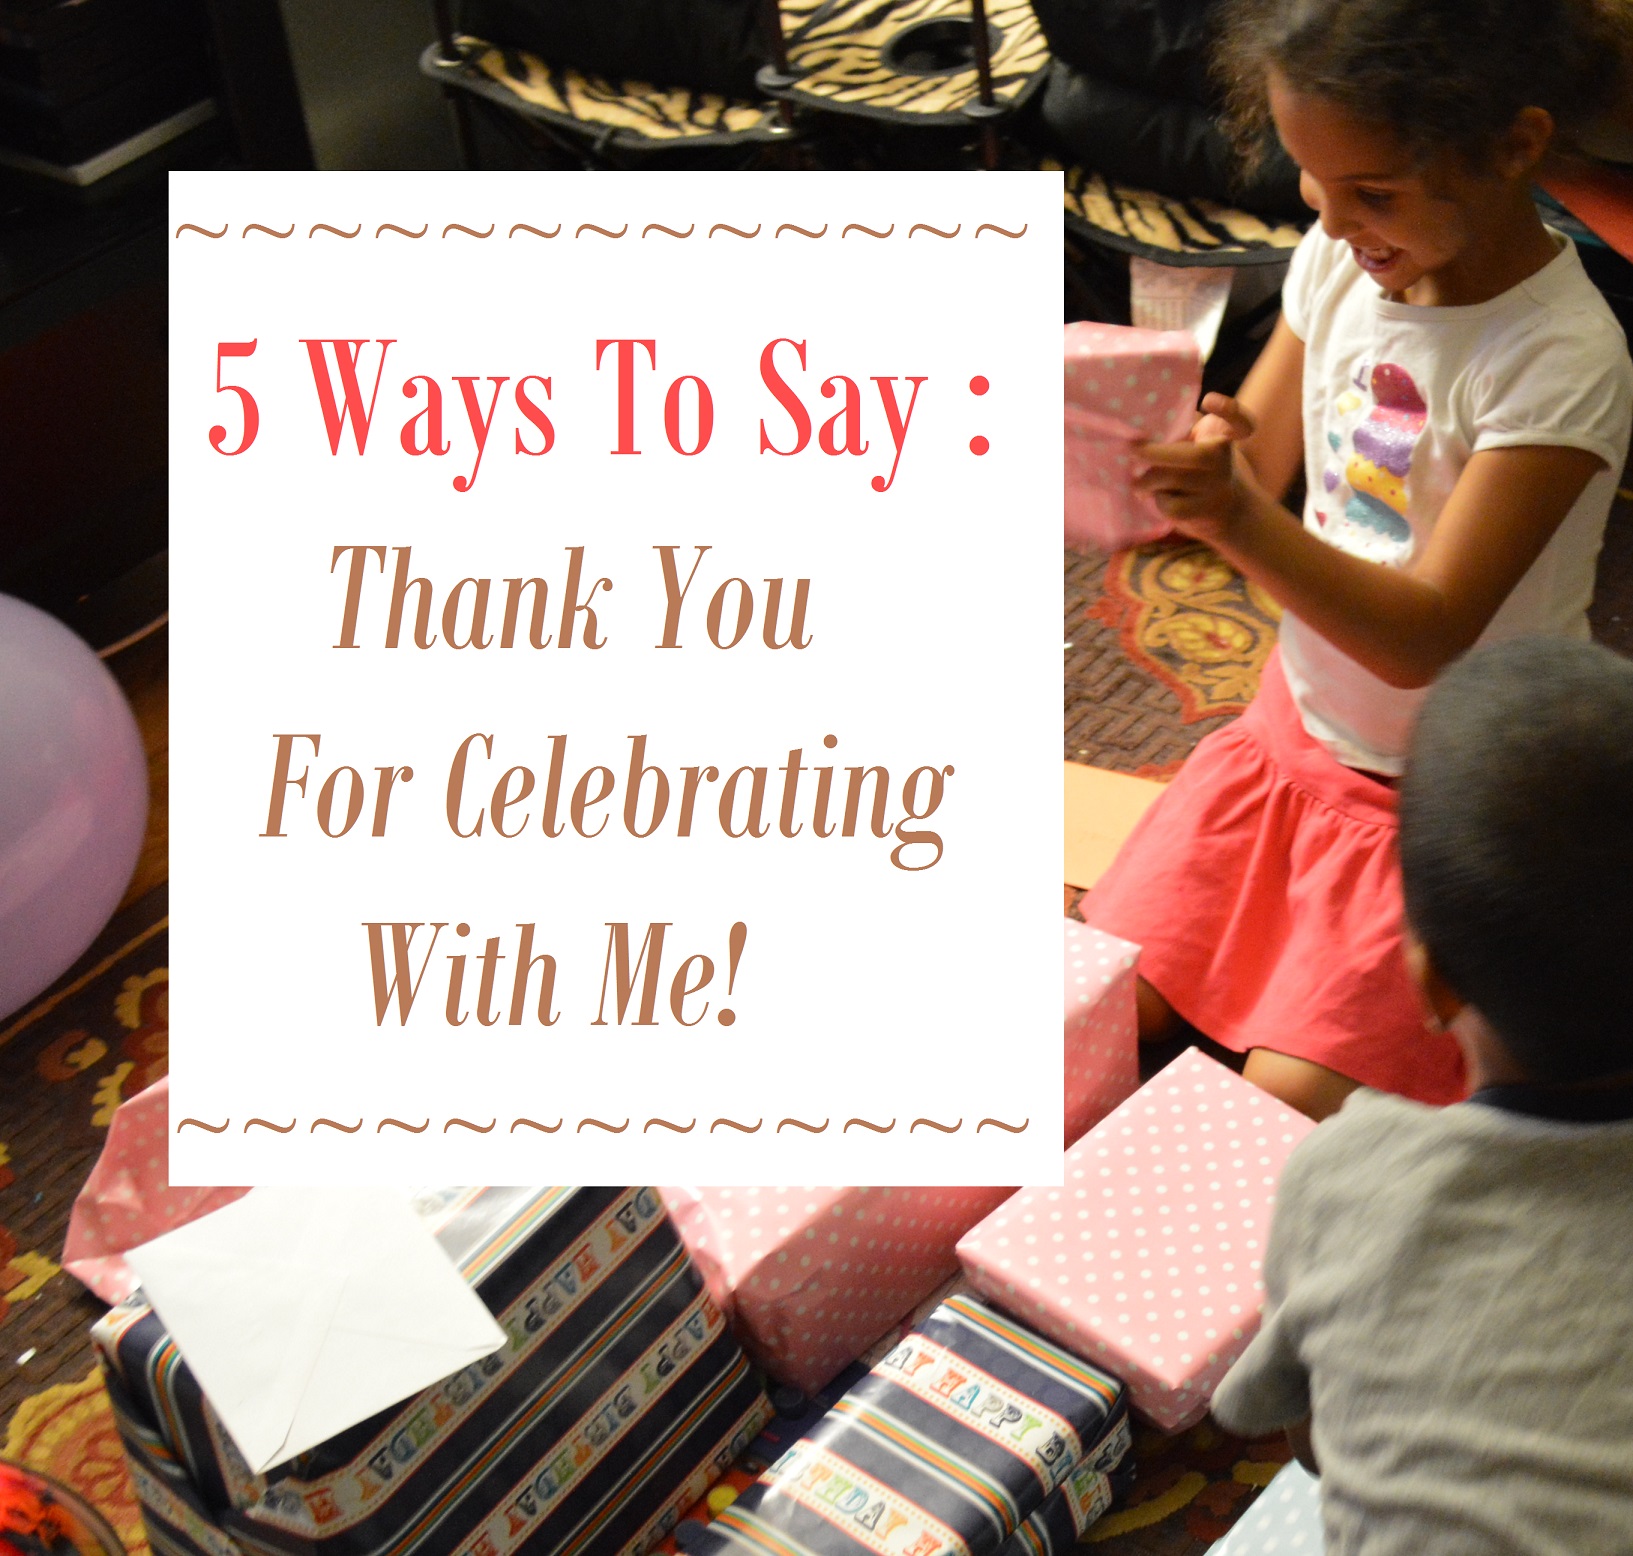 5 Ways To Say Thank You For Celebrating With Me